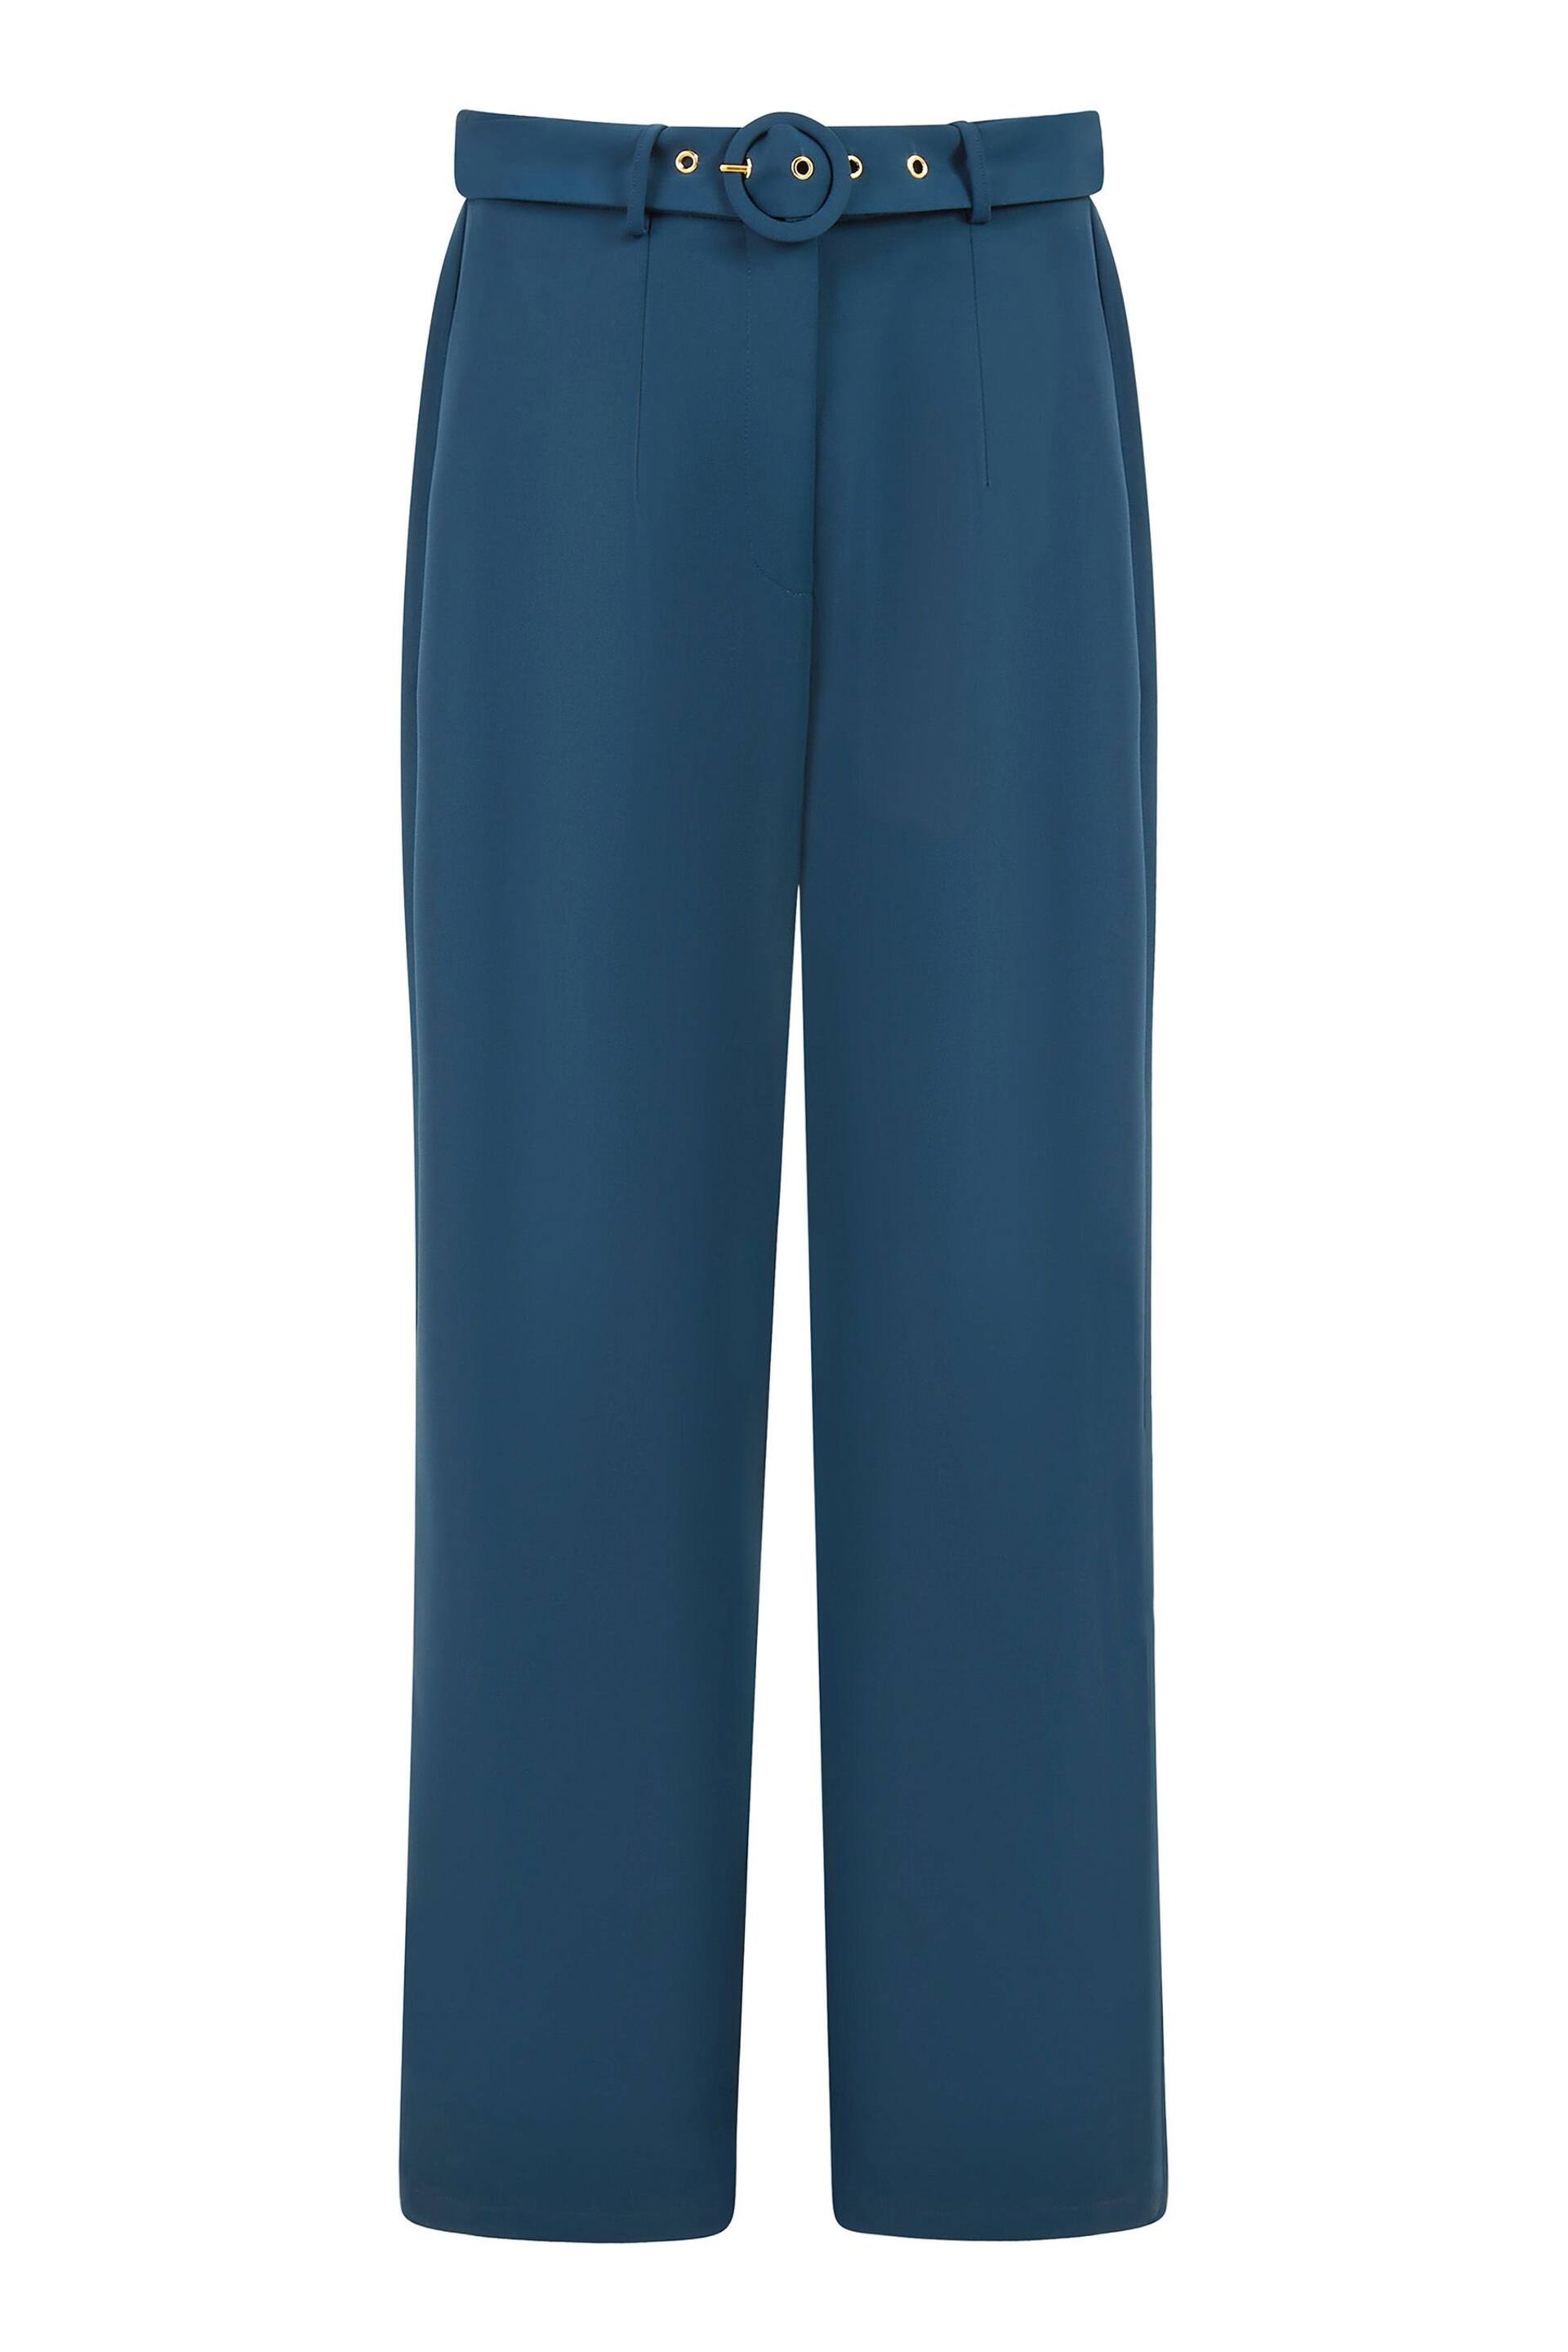 Yumi Blue Straight Leg Crepe Trousers With Belt - Image 4 of 4